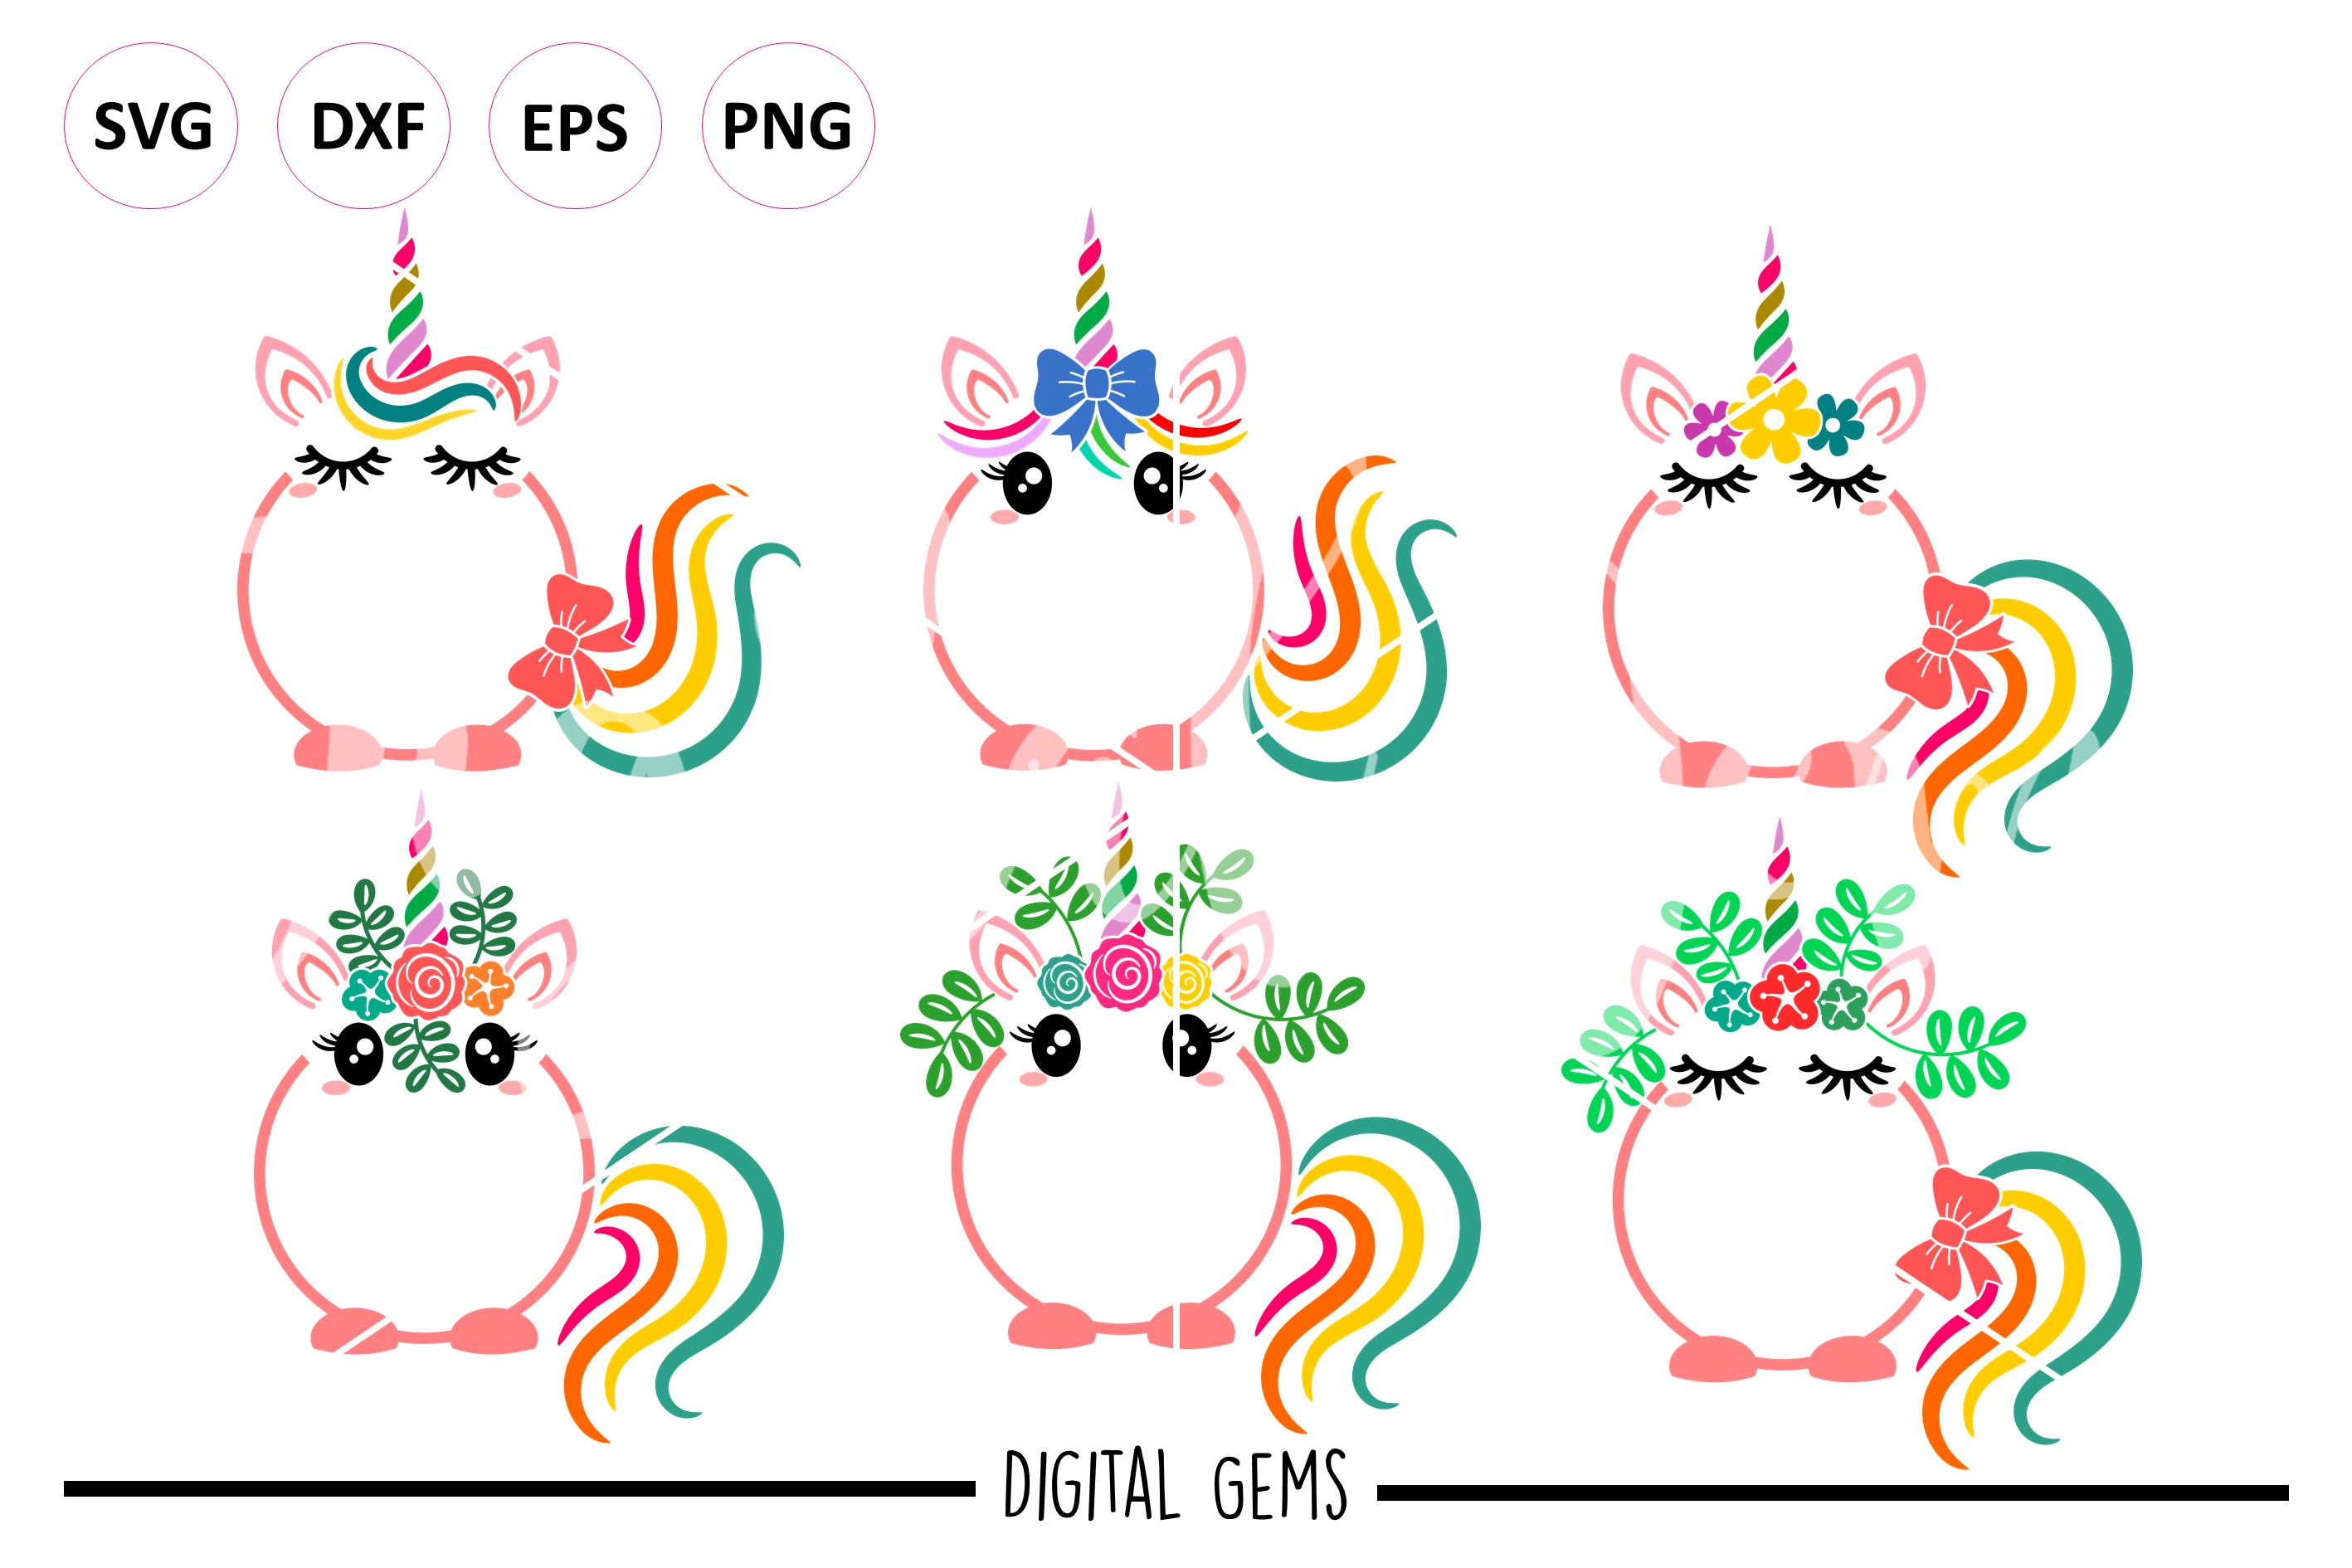 Download Unicorn designs SVG / DXF / EPS / PNG files